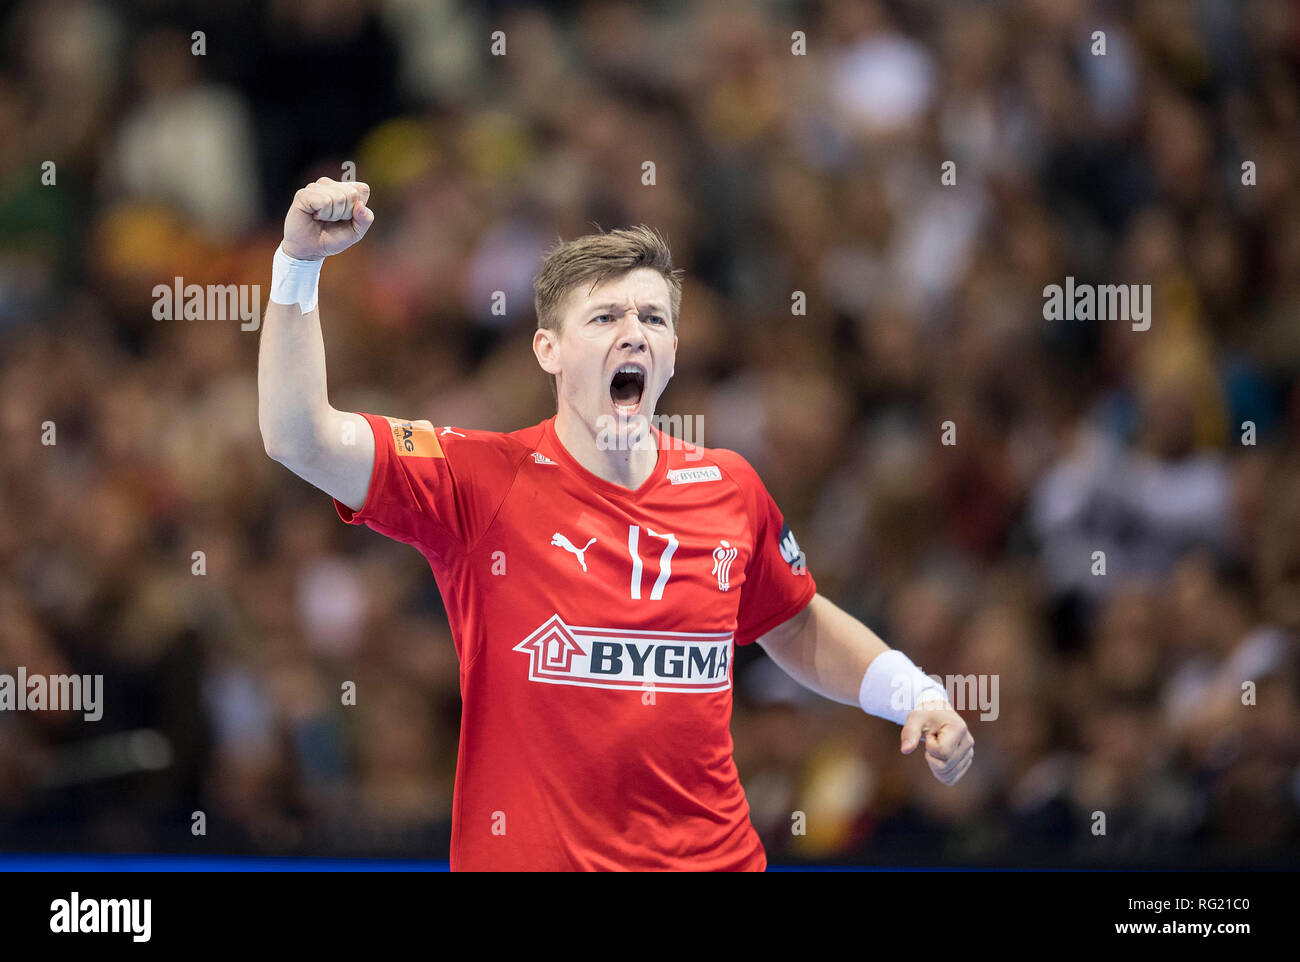 Lasse svan denmark in action hi-res stock photography and images - Alamy